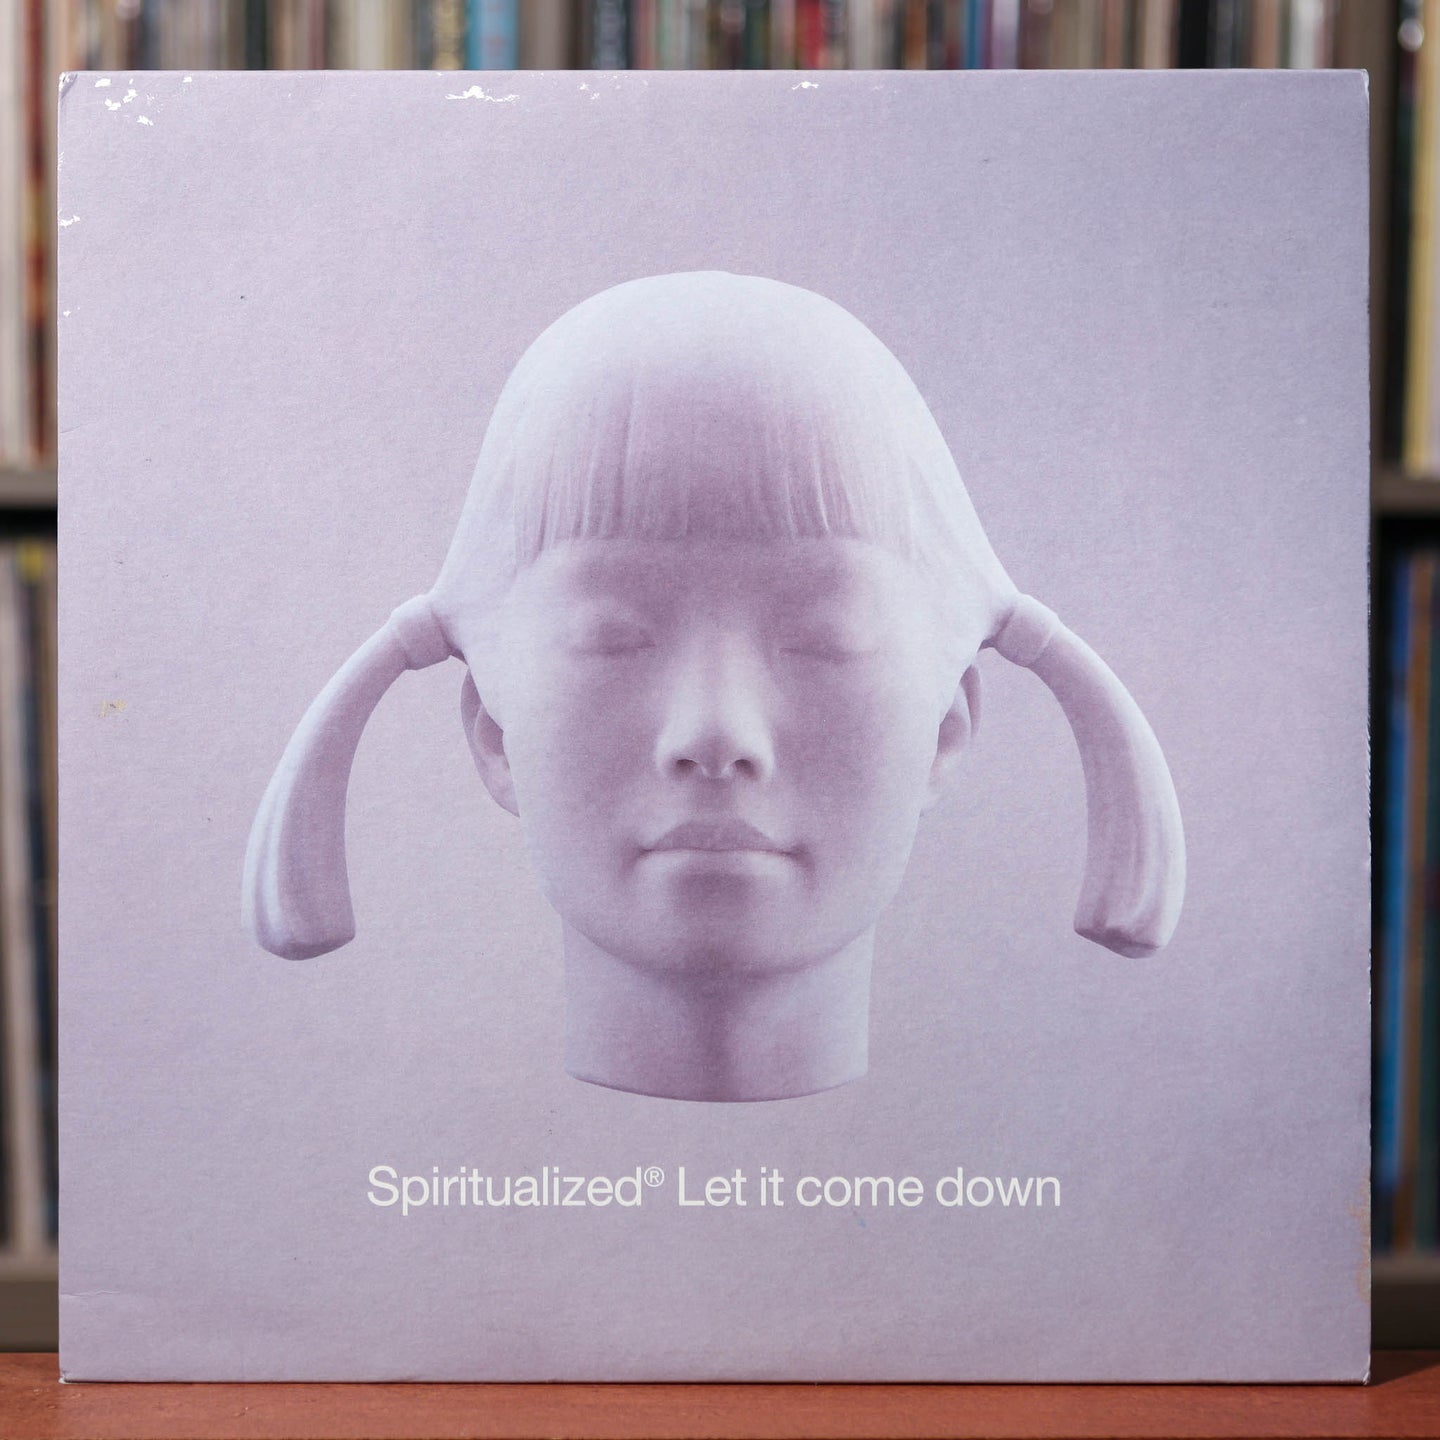 Spiritualized - Let It Come Down - UK Import - 2001 Spaceman Records, VG++/VG+